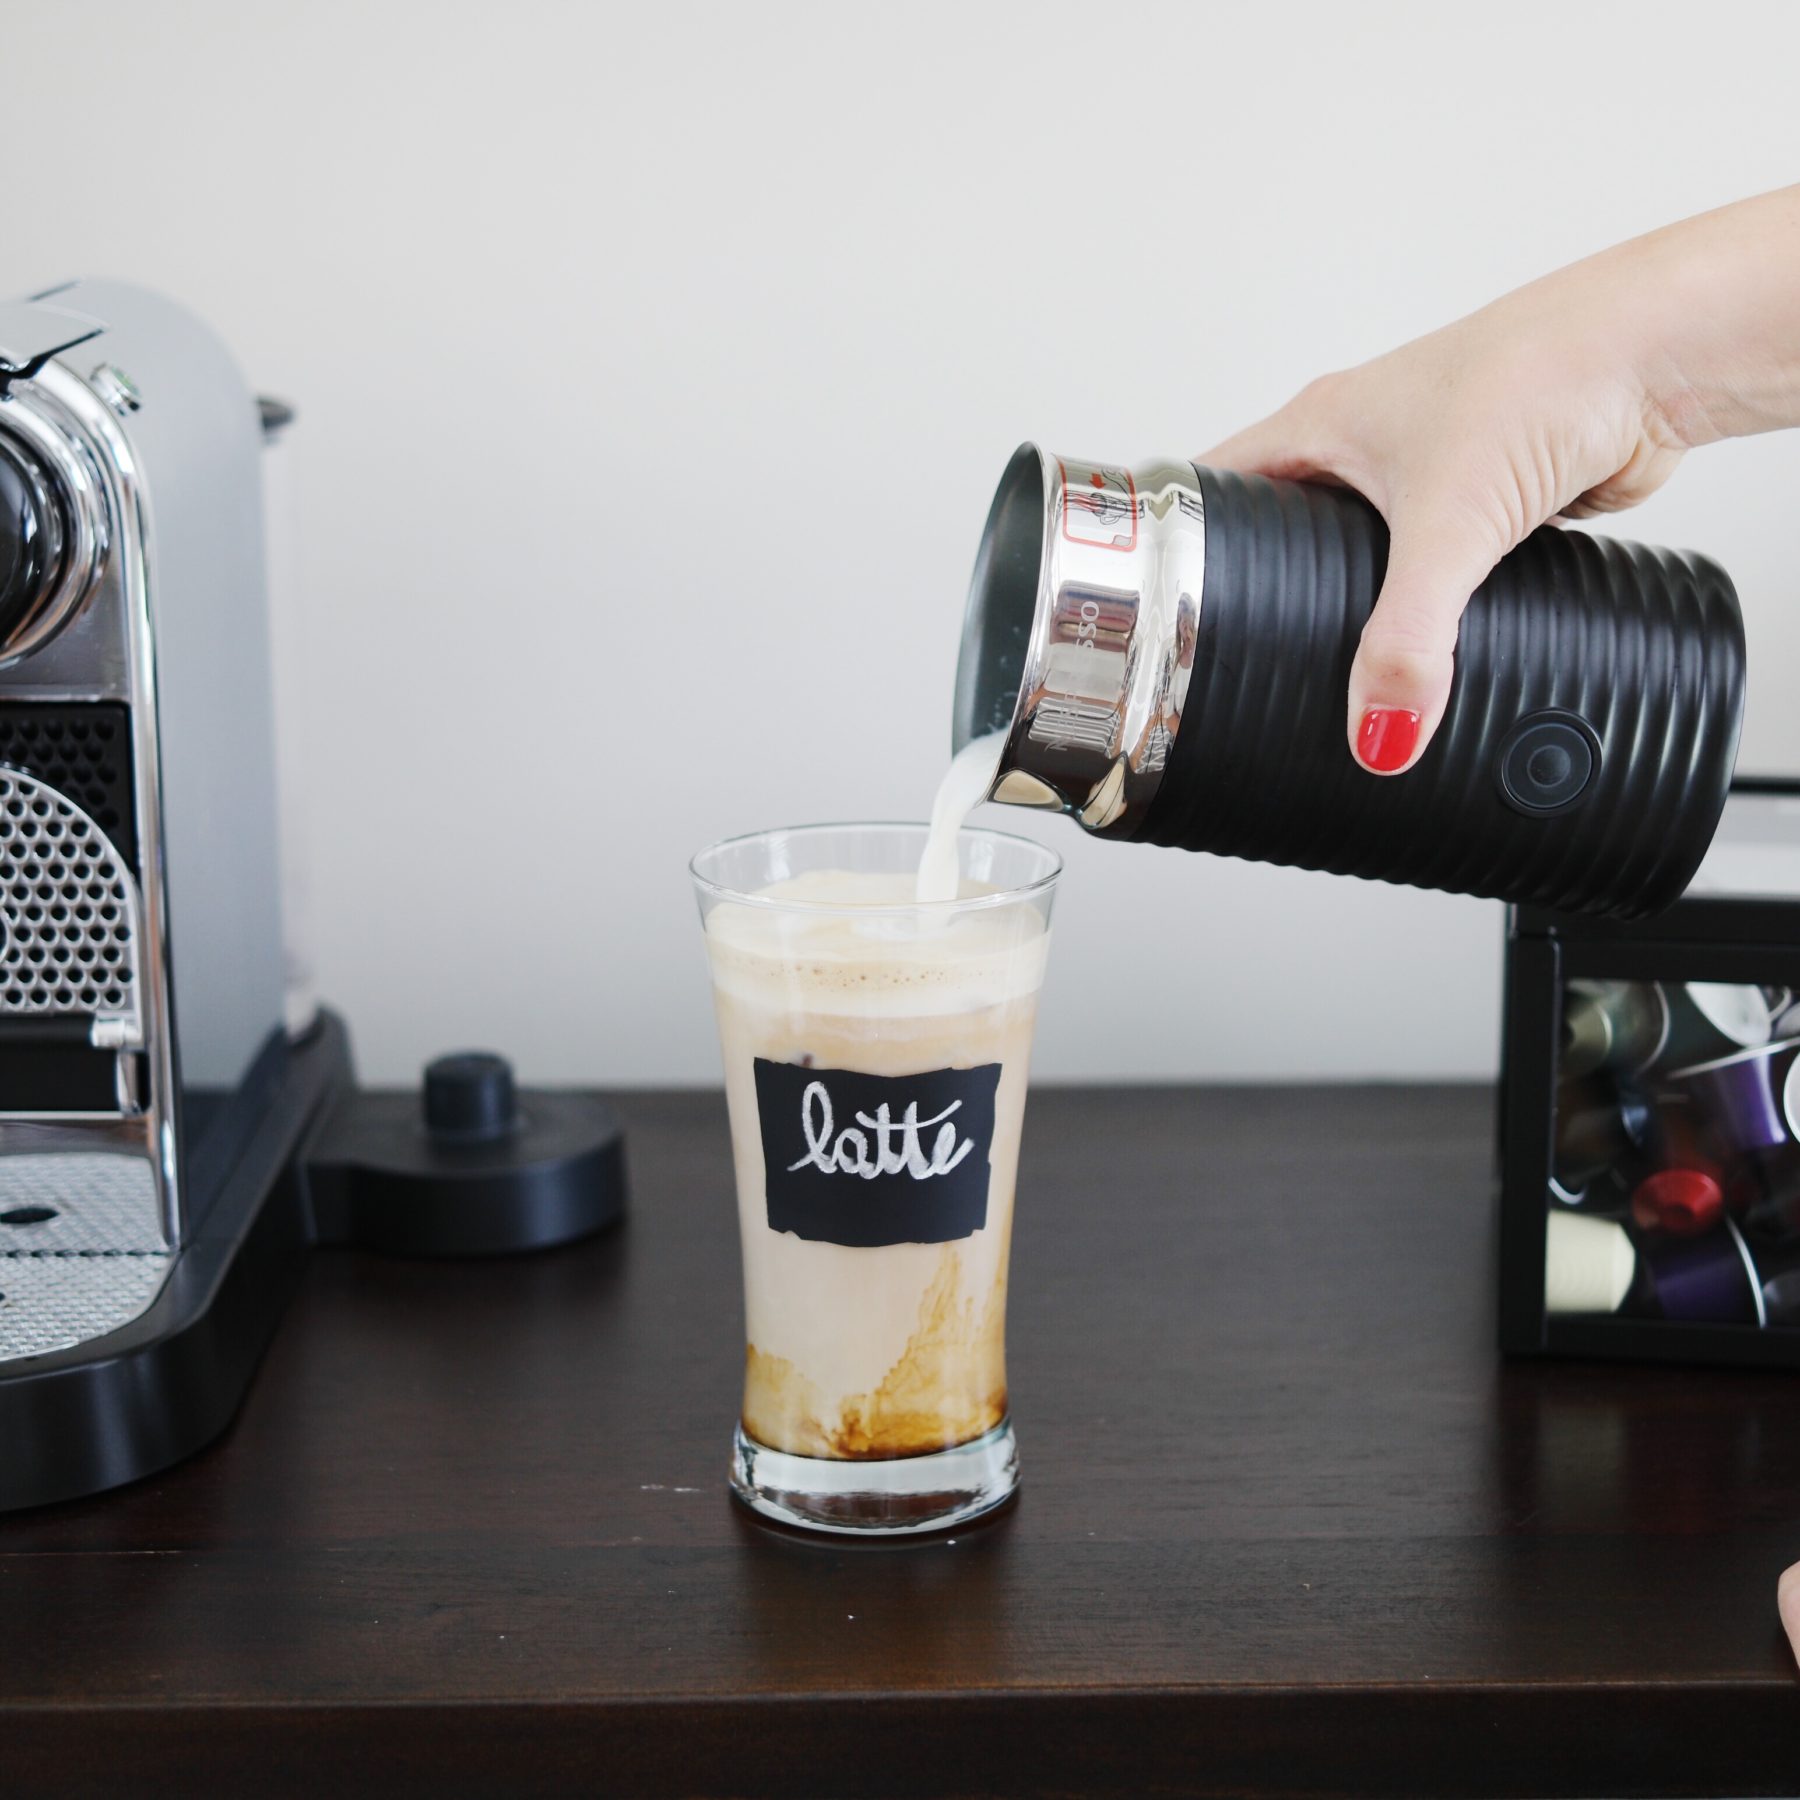 My favorite mid-day drink: homemade iced latte - The Small Things Blog